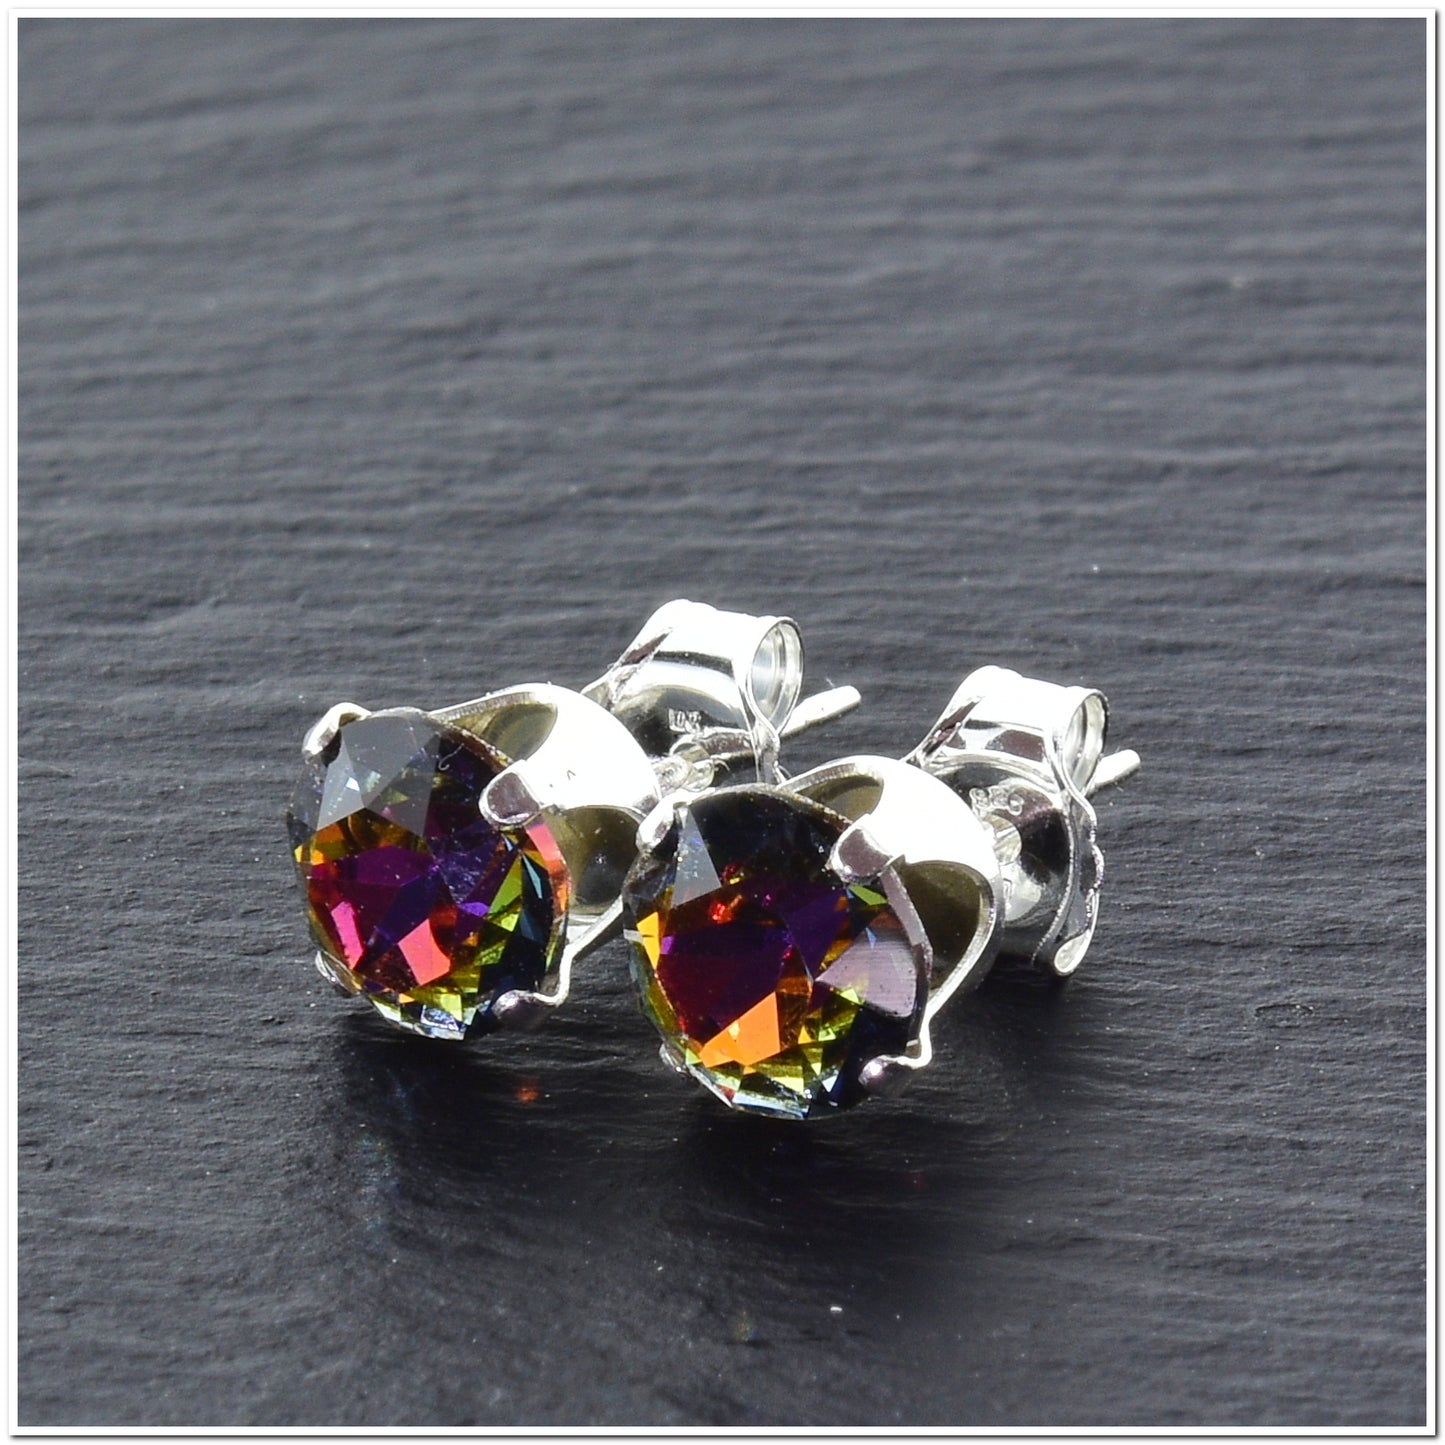 pewterhooter® Women's Classic Collection 925 Sterling silver earrings with sparkling Volcano crystals, packaged in a gift box for any occasion.